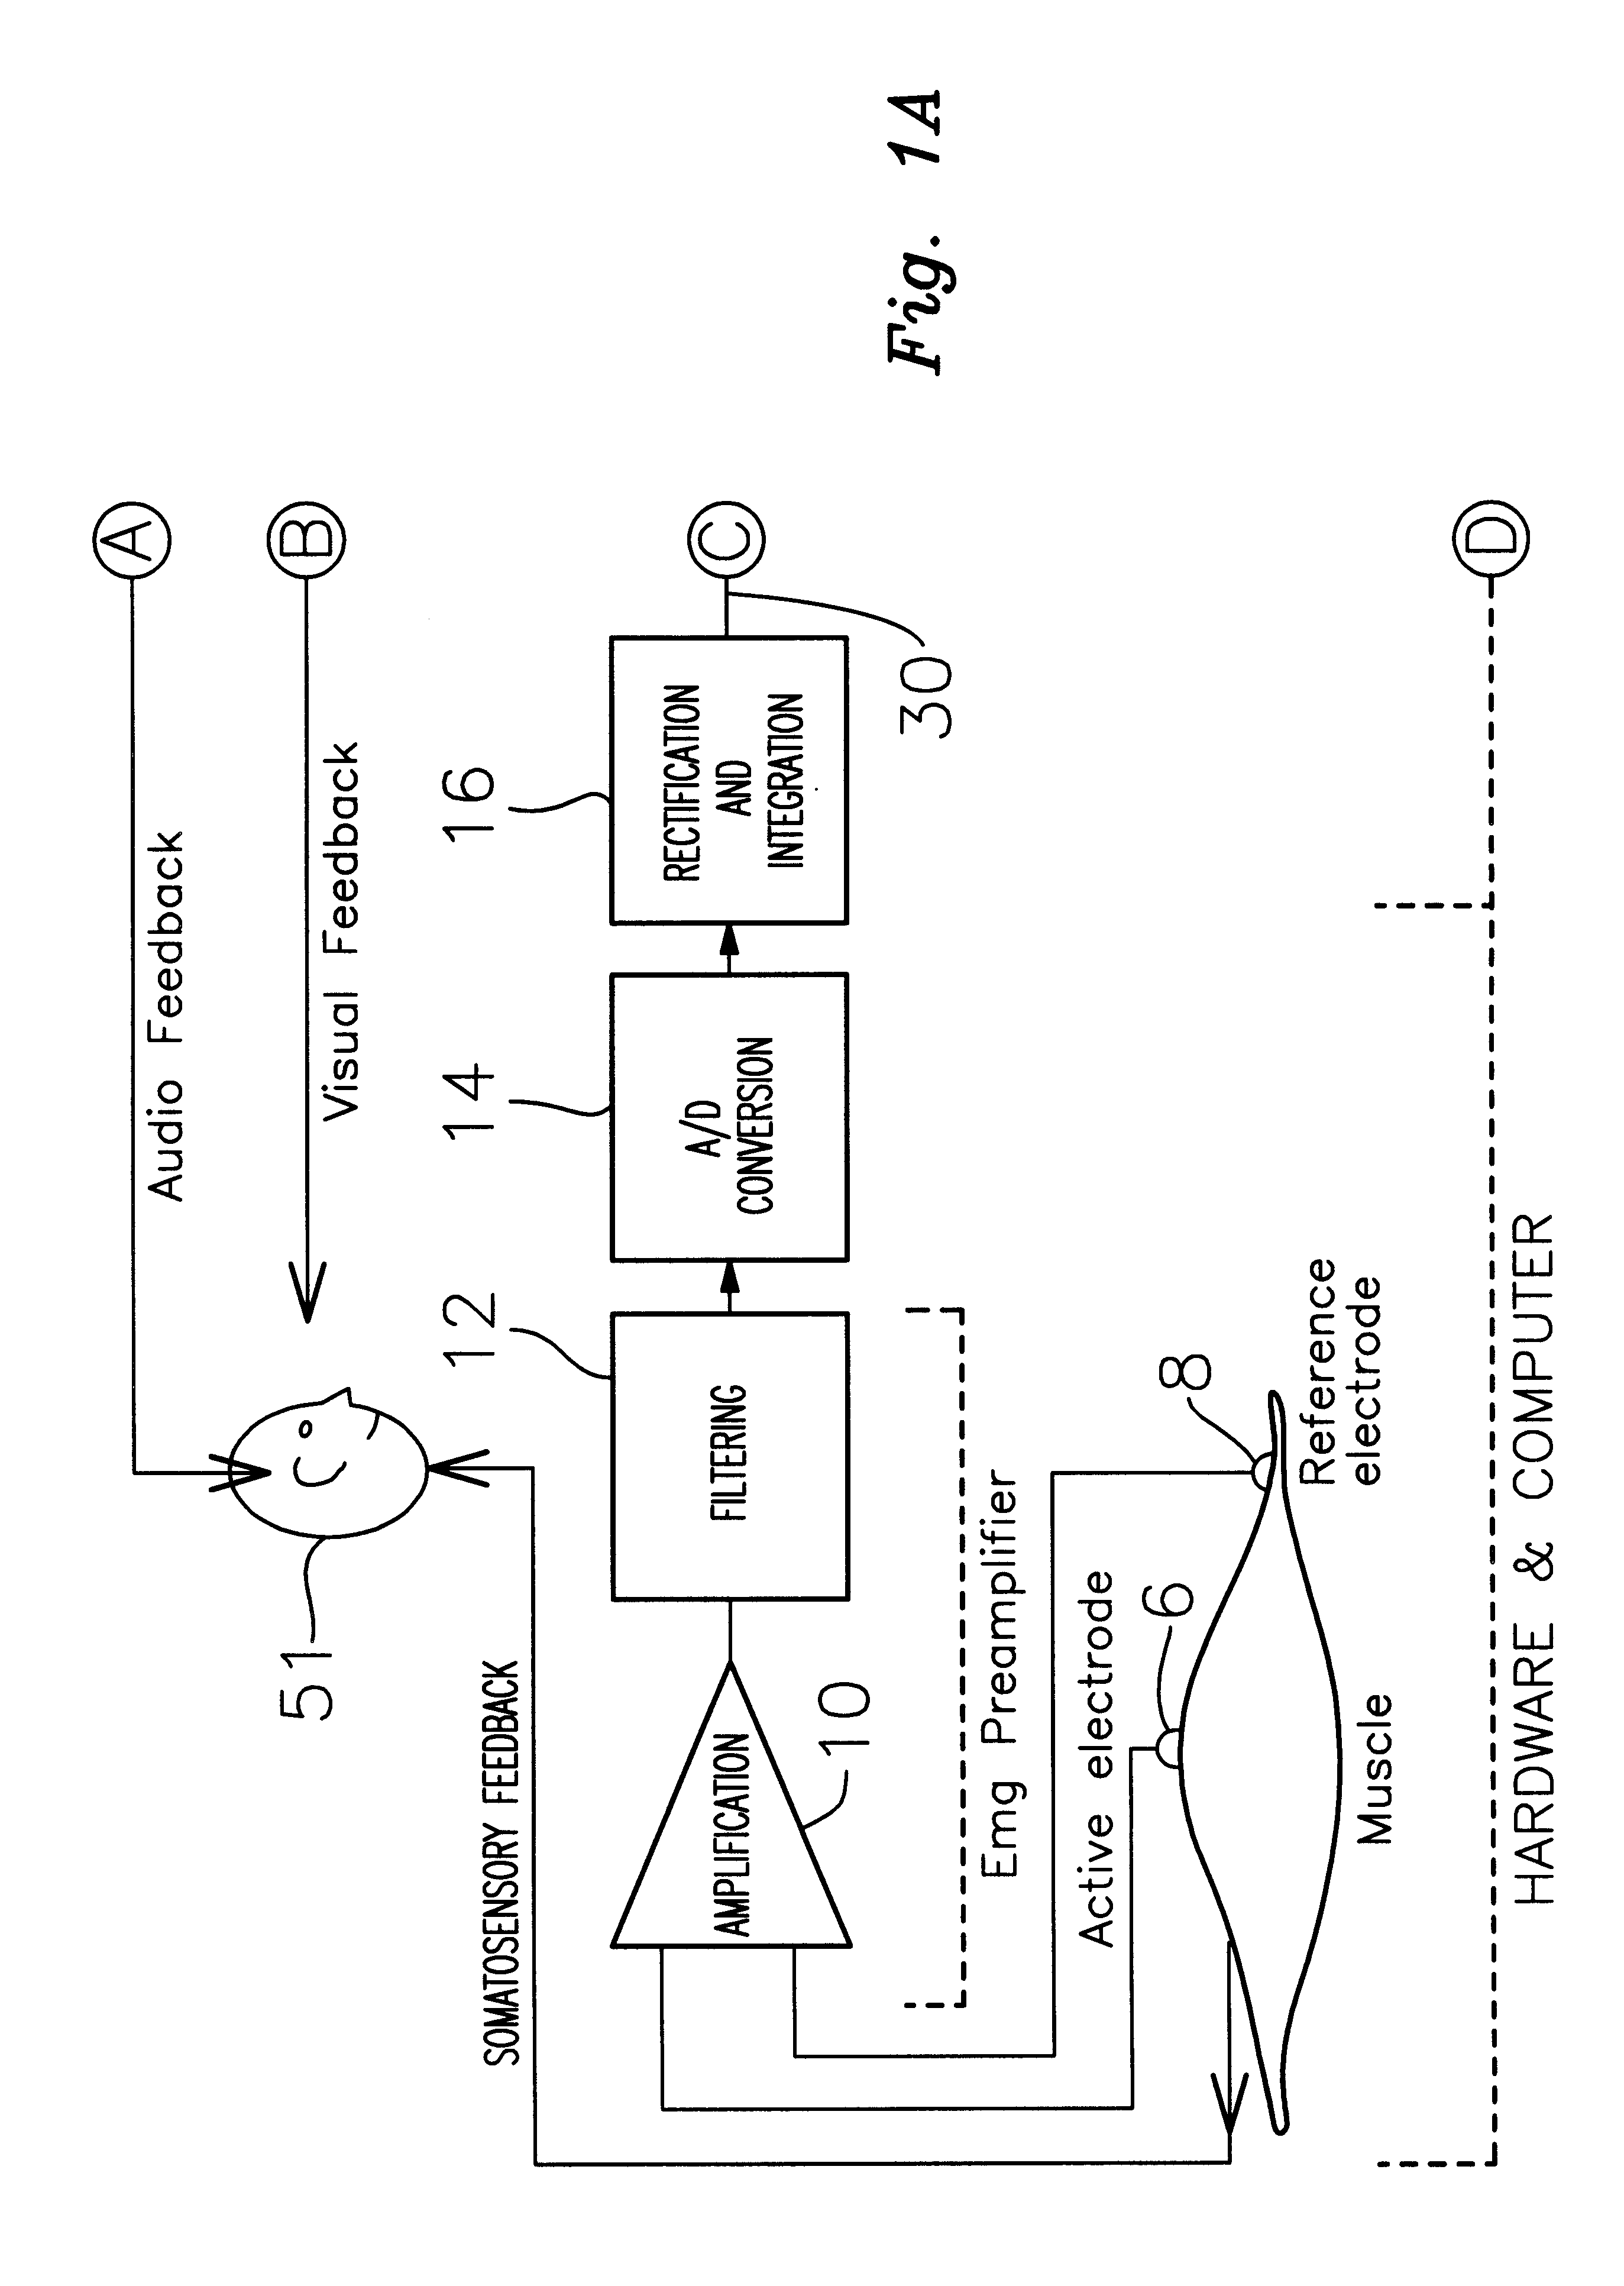 Apparatus and methods for detecting and processing EMG signals